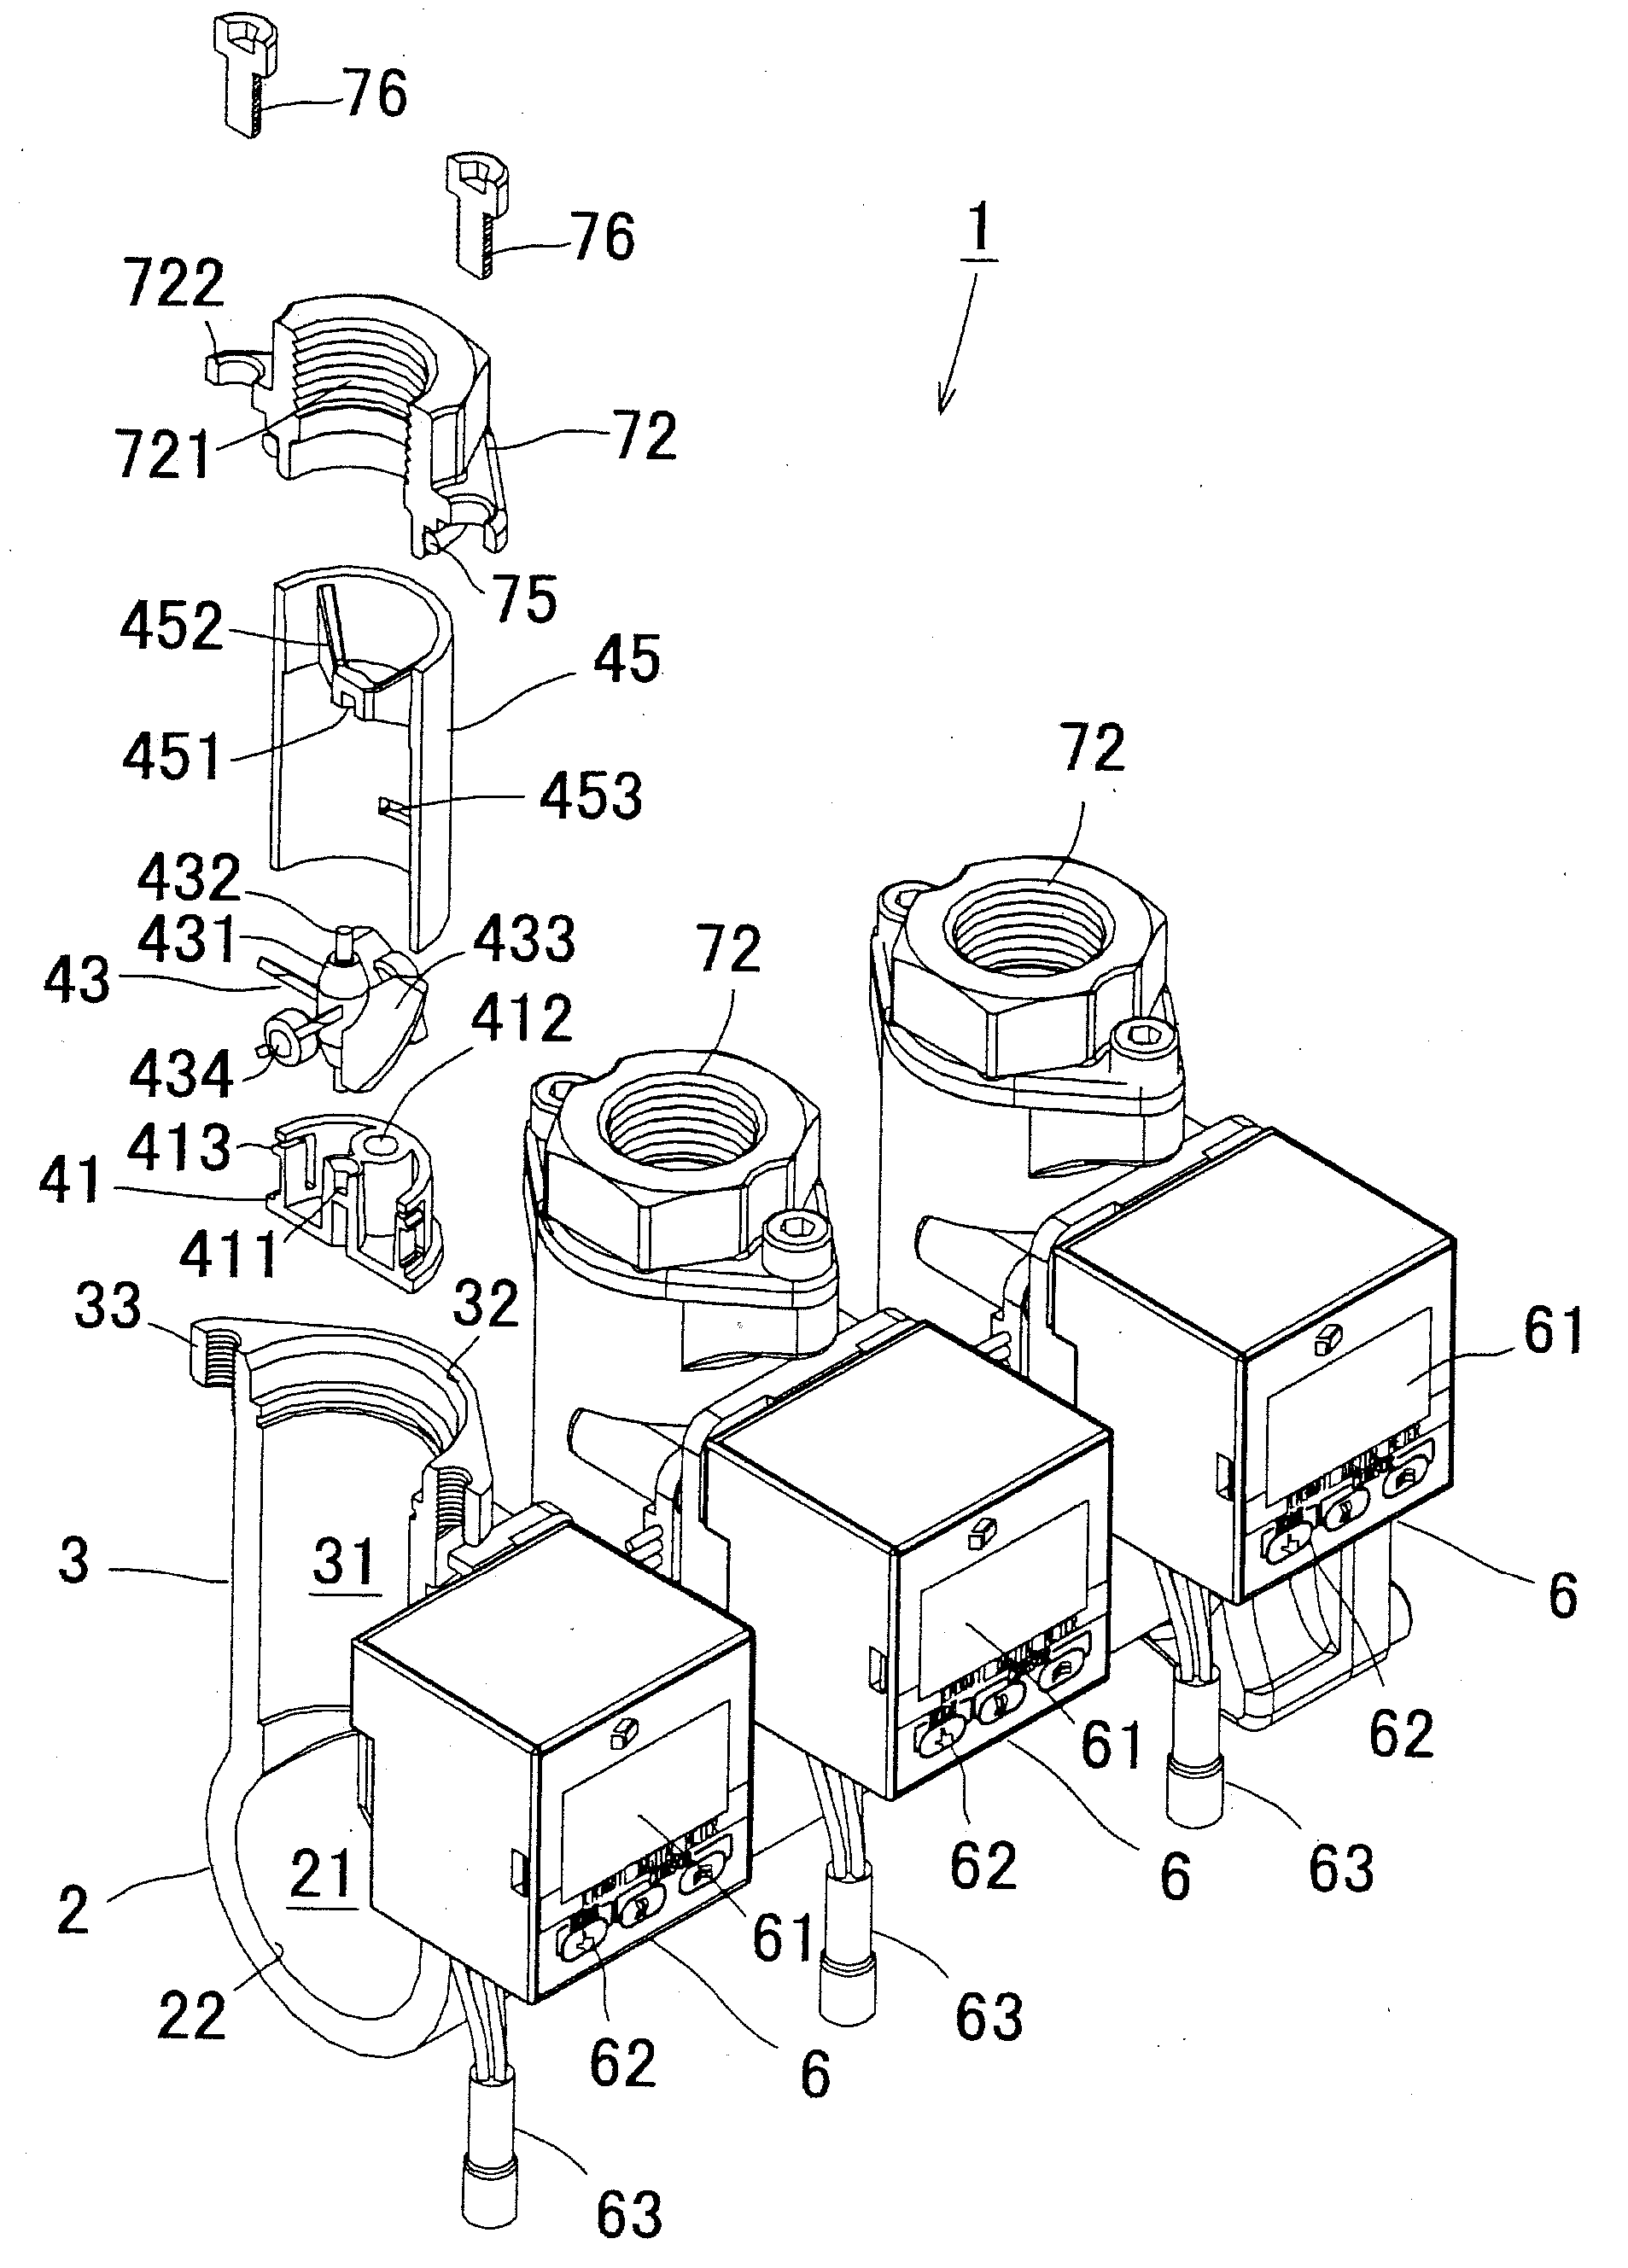 Pipe Assembly Unit With Built-In Flow Sensors